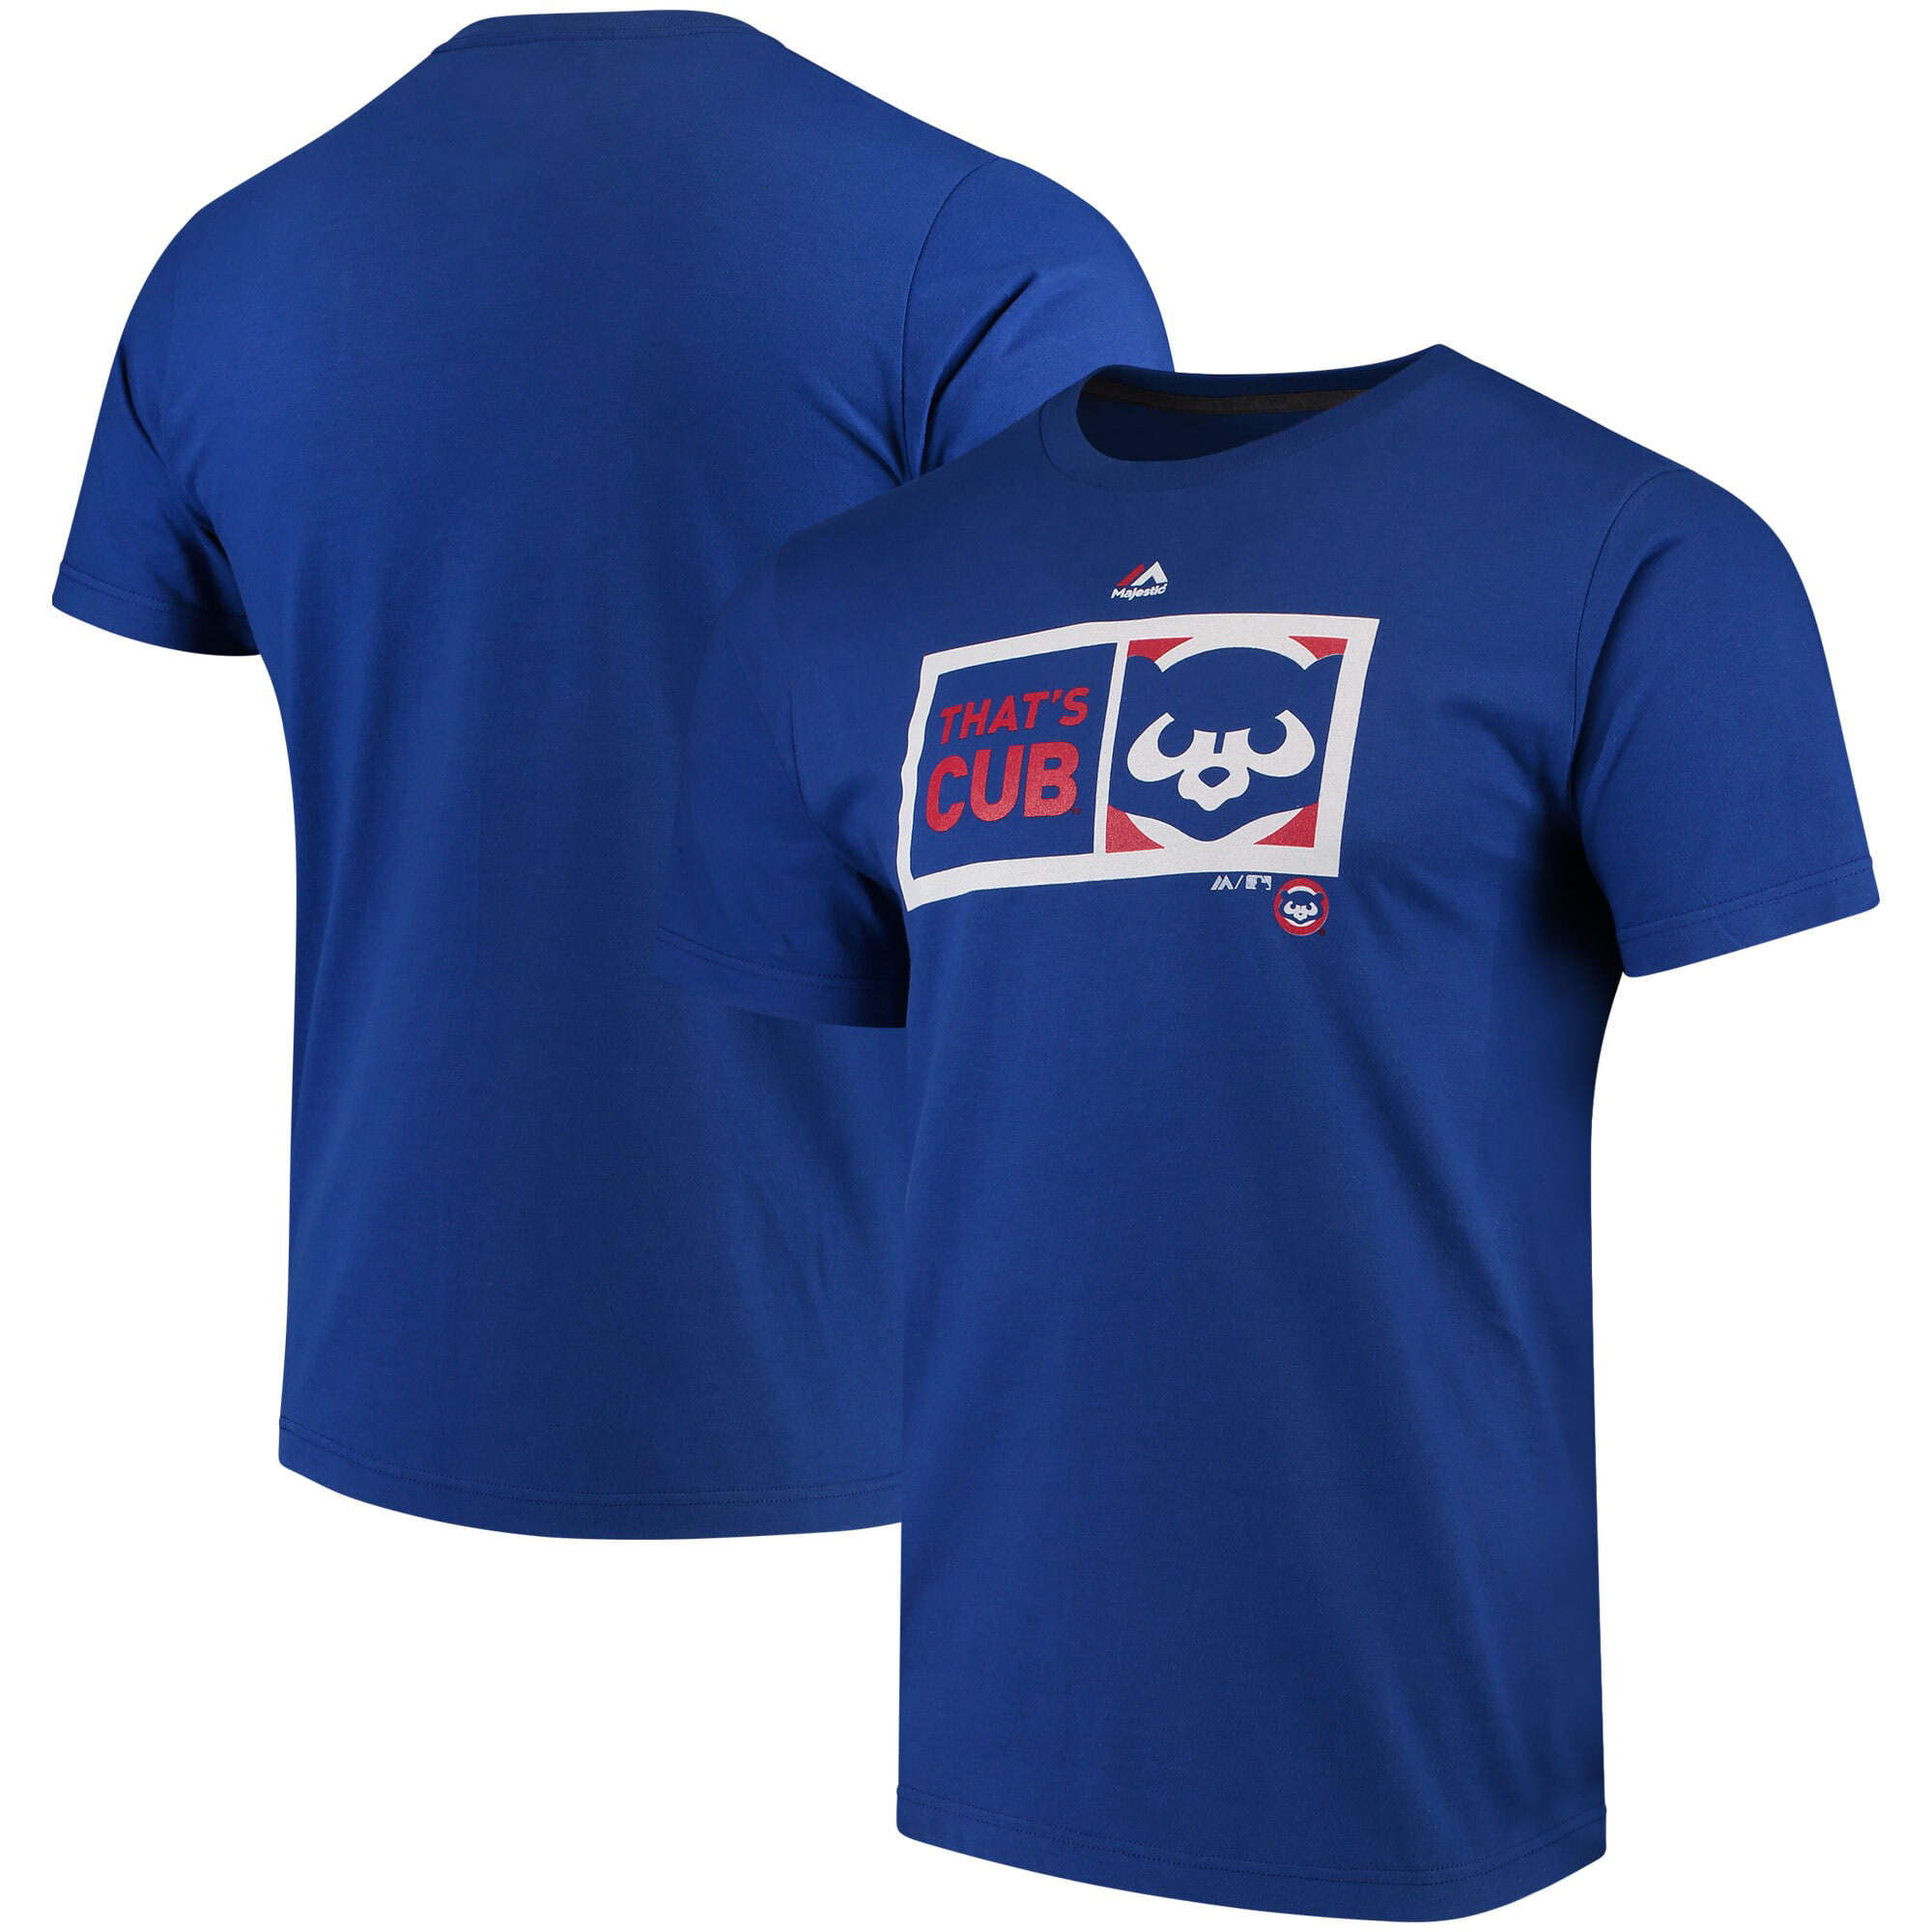 Majestic Chicago Cubs Royal T-Shirt Youth 